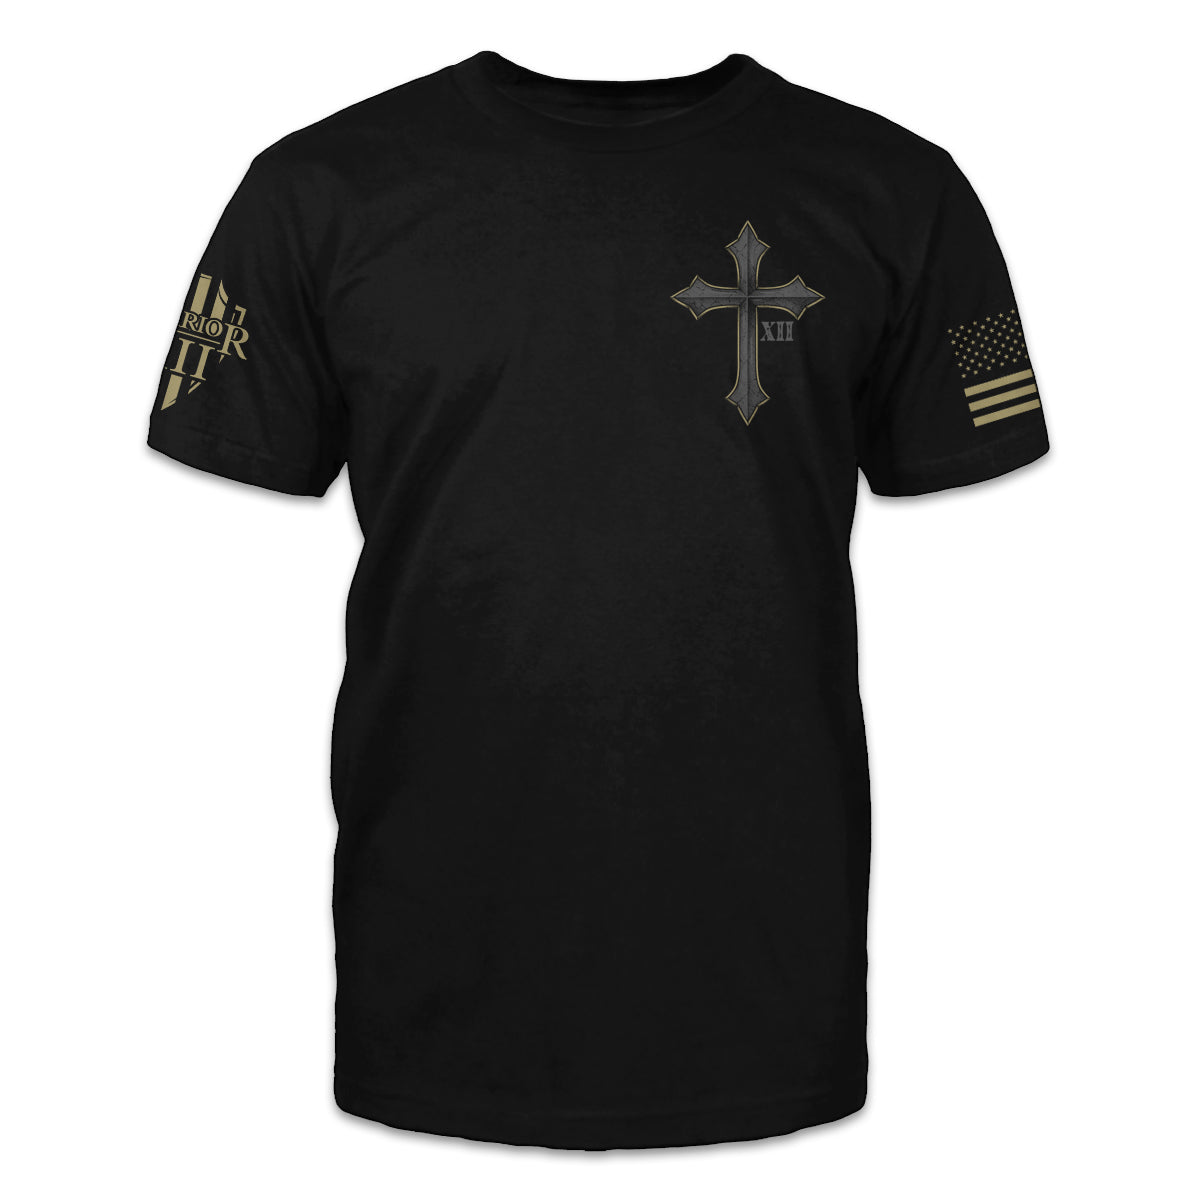 A black t-shirt with the cross and roman numerals XII printed on the front.